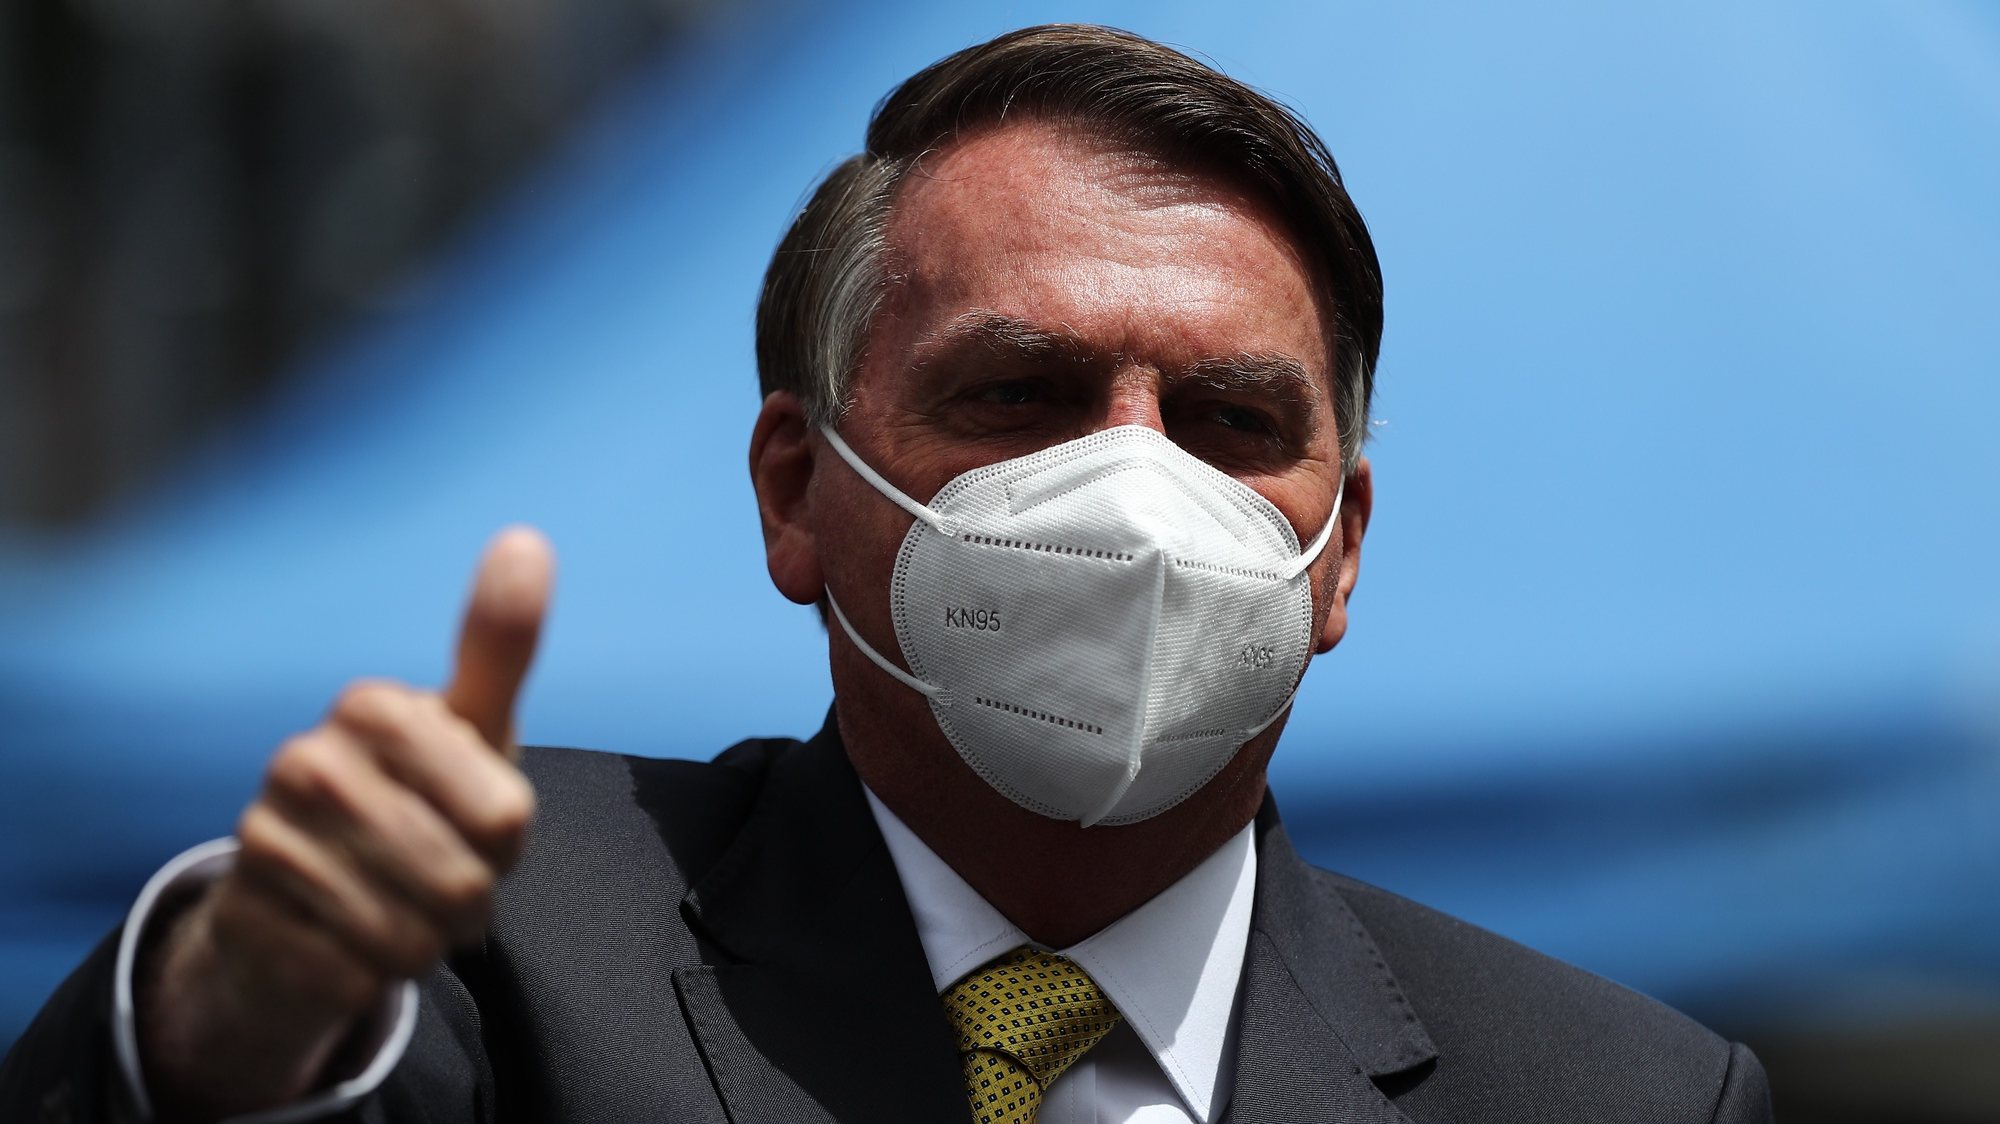 epa09225628 Brazilian President Jair Bolsonaro attends the investiture of the new president of Ecuador, Guillermo Lasso, at the headquarters of the National Assembly, in Quito, Ecuador, 24 May 2021. Guillermo Lasso, who takes office as President of Ecuador, faces the challenges of promoting mass vaccination against covid-19 as the main recipe to reactivate an economy that depends on international aid and with a limited budget. For now, he has already anticipated that his administration will bet on doubling oil production, will put gasoline refineries under concession, will promote mining and offer several state areas to private initiative.  EPA/Jose Jacome